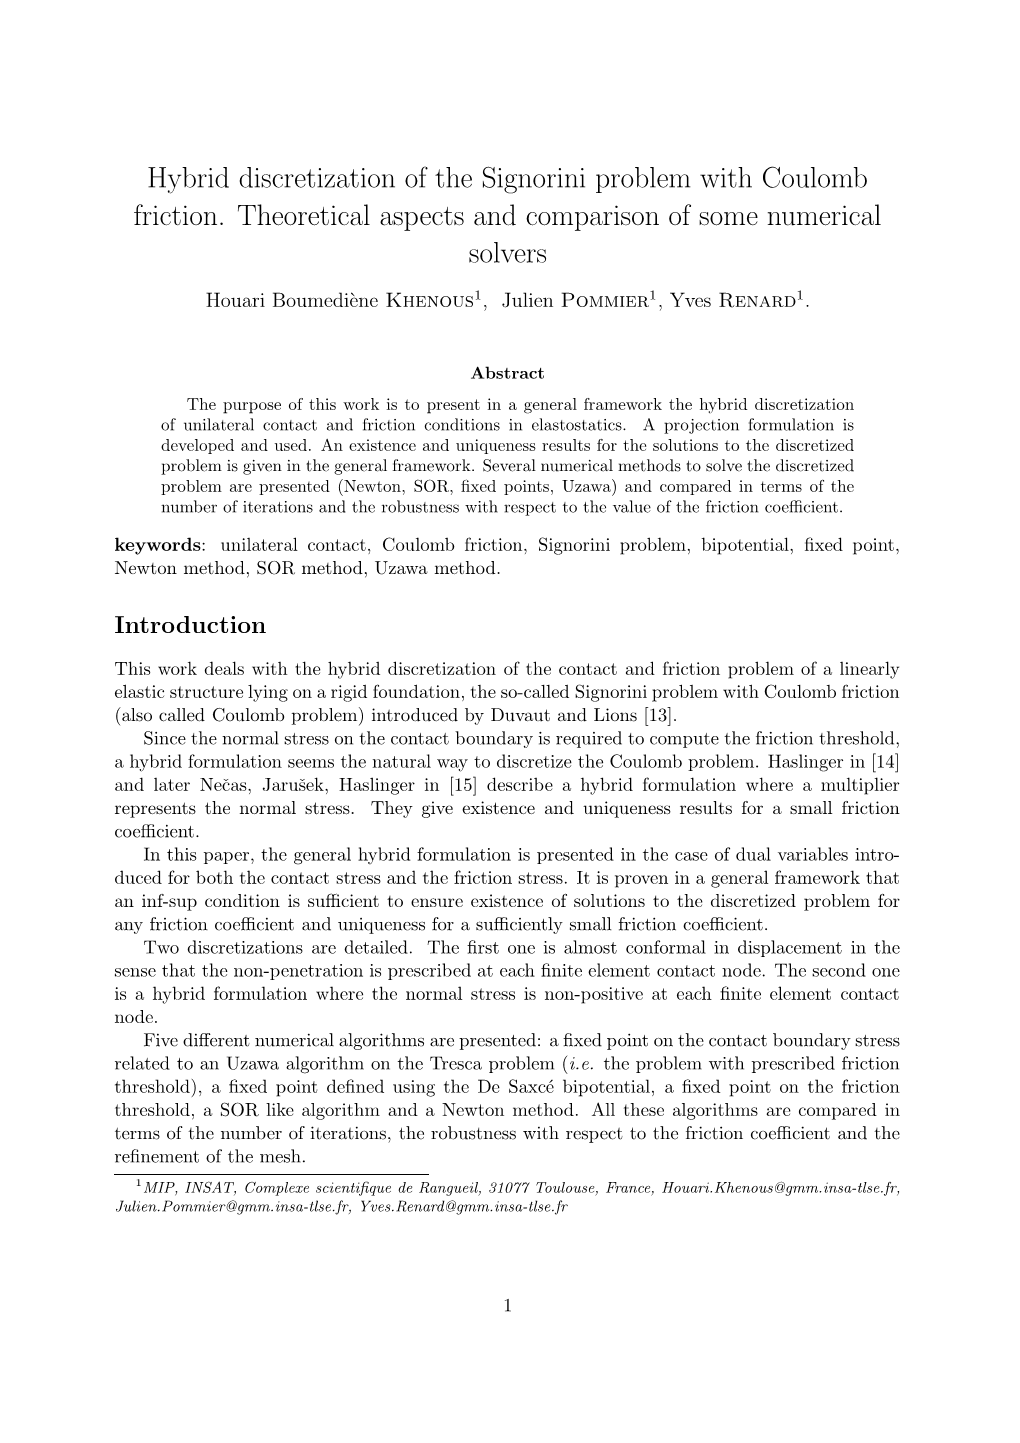 Hybrid Discretization of the Signorini Problem with Coulomb Friction. Theoretical Aspects and Comparison of Some Numerical Solvers